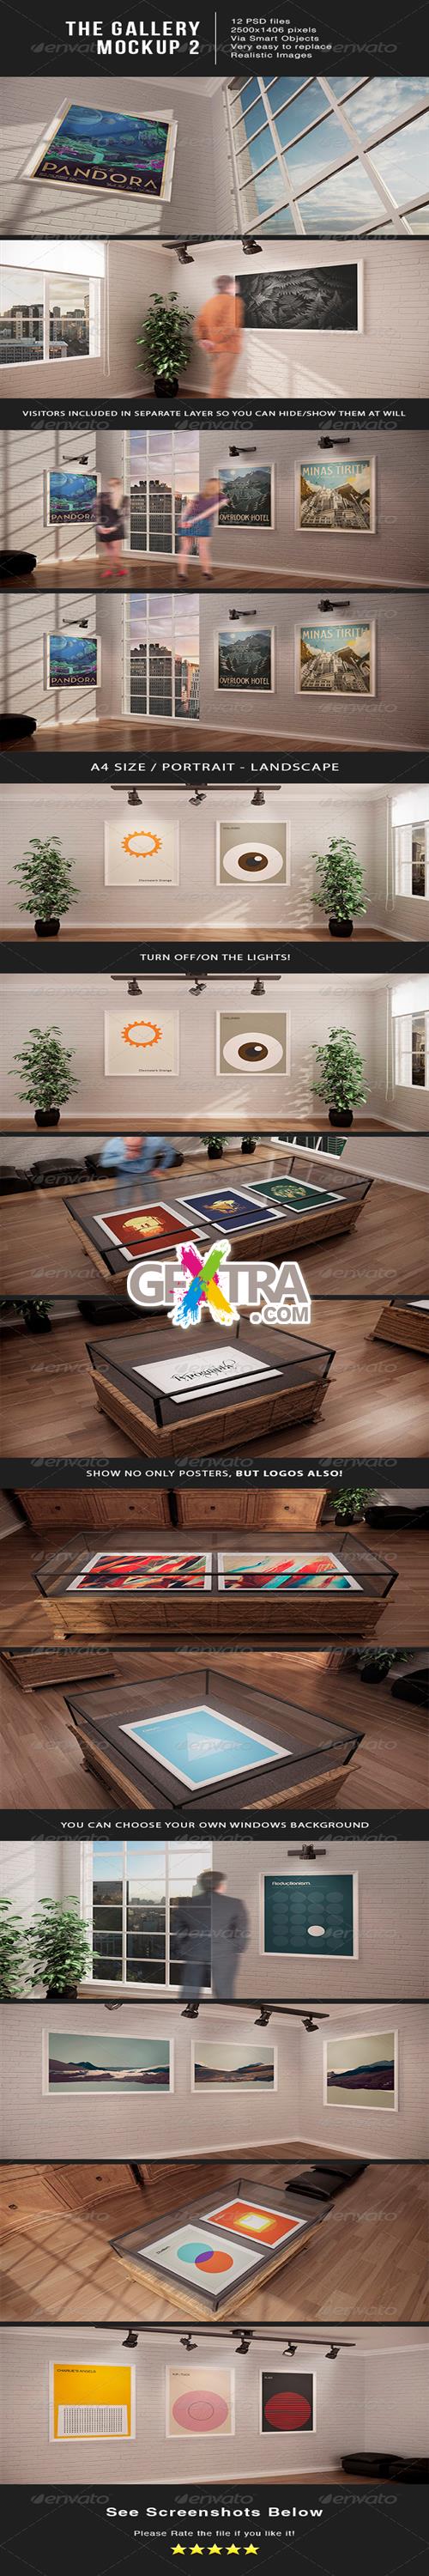 GraphicRiver - The Gallery MockUp 2